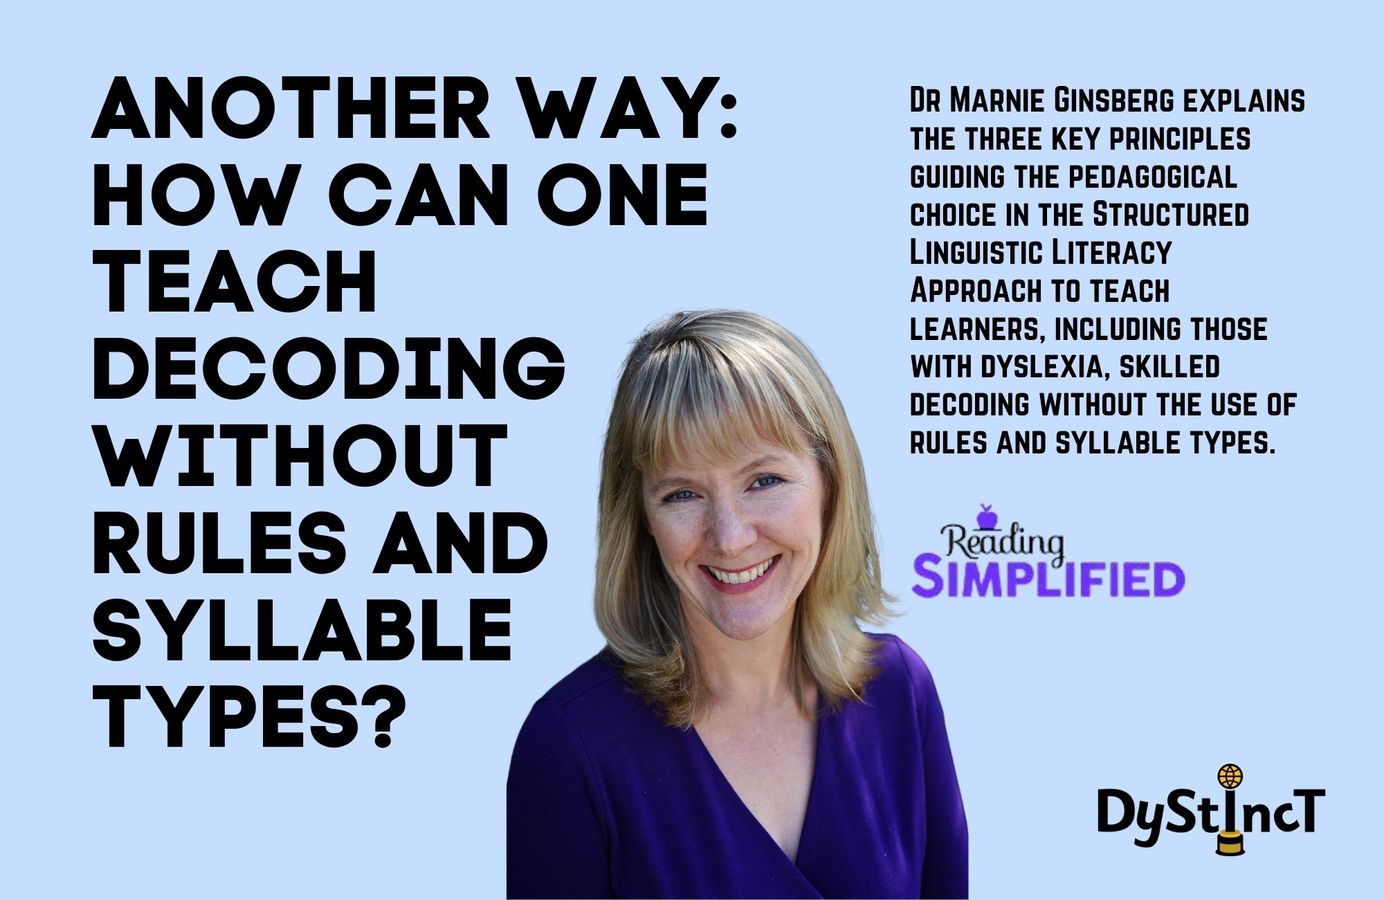 Issue 13: Another Way: How Can One Teach Decoding without Rules and  Syllable Types? - Dr Marnie Ginsberg